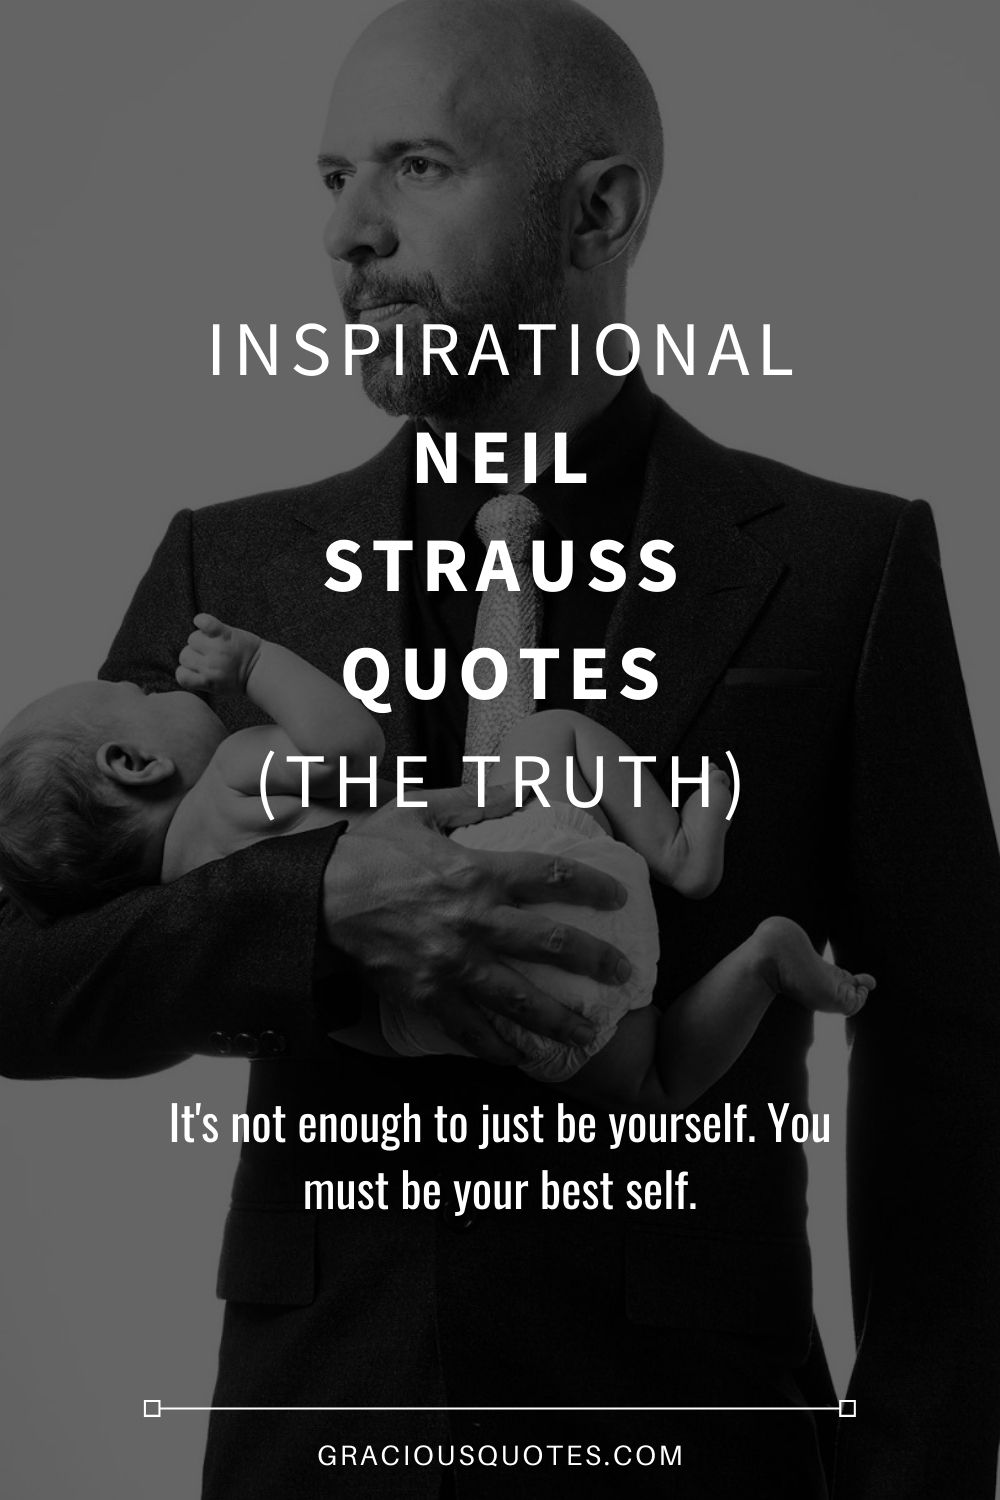 Inspirational Neil Strauss Quotes (THE TRUTH) - Gracious Quotes